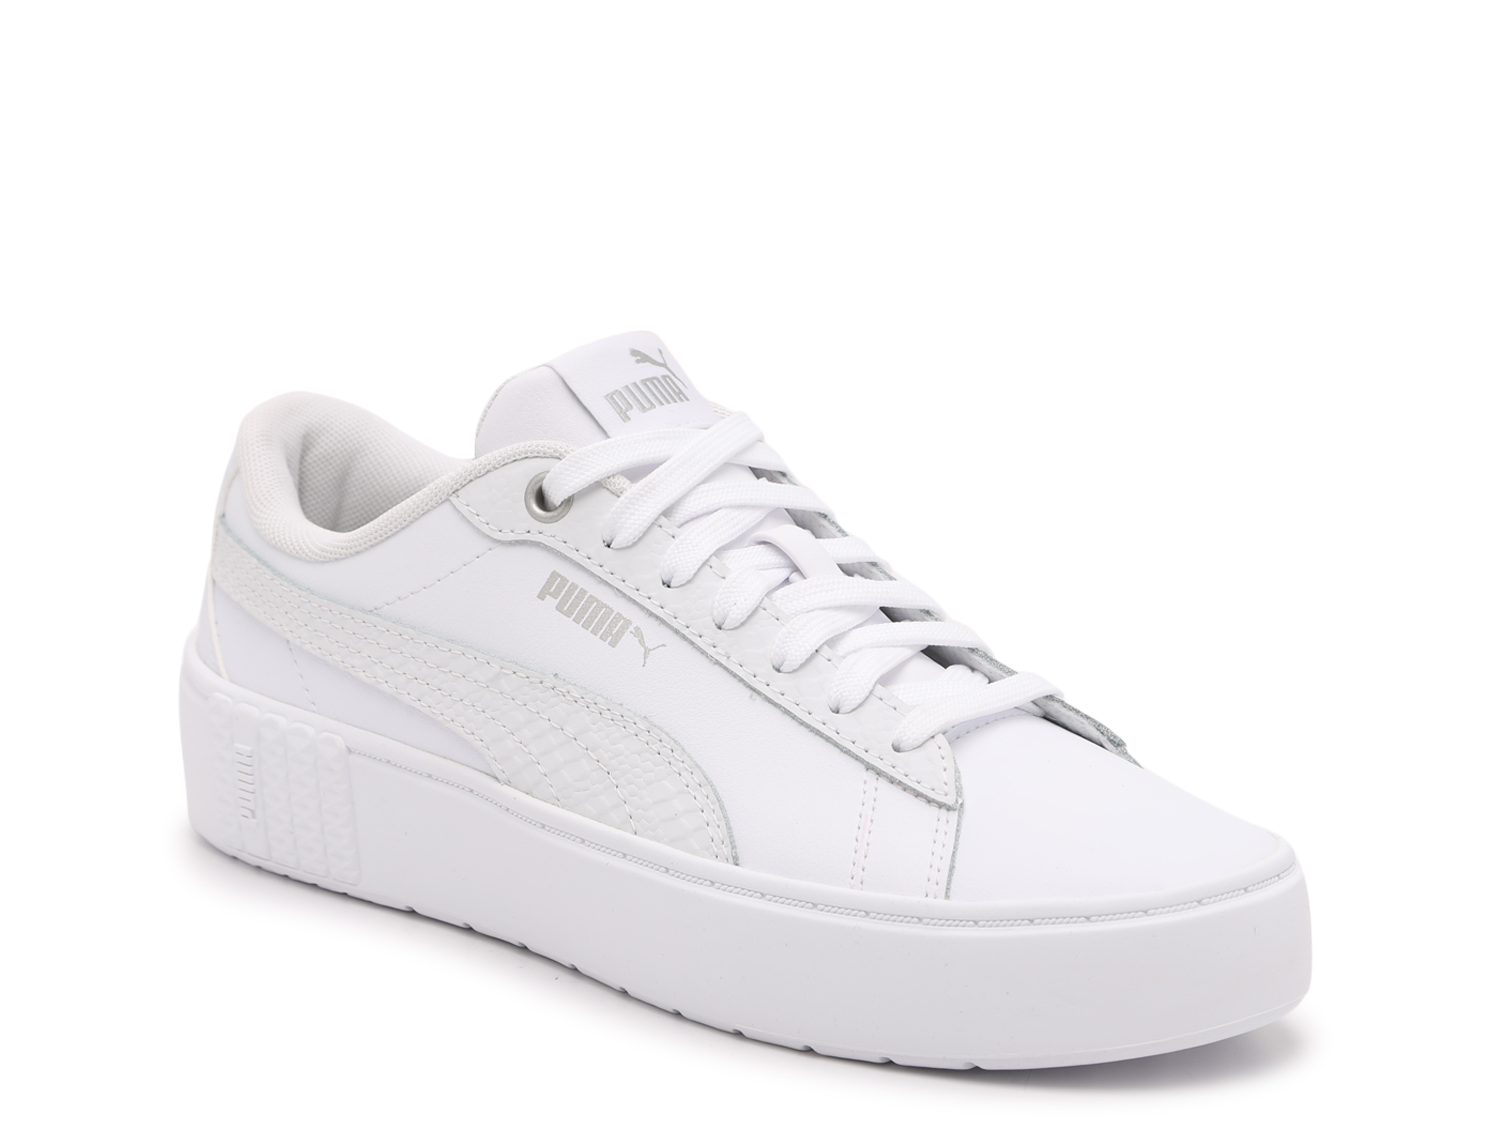 Puma Shoes  Sneakers | Basketball  Running Shoes | DSW